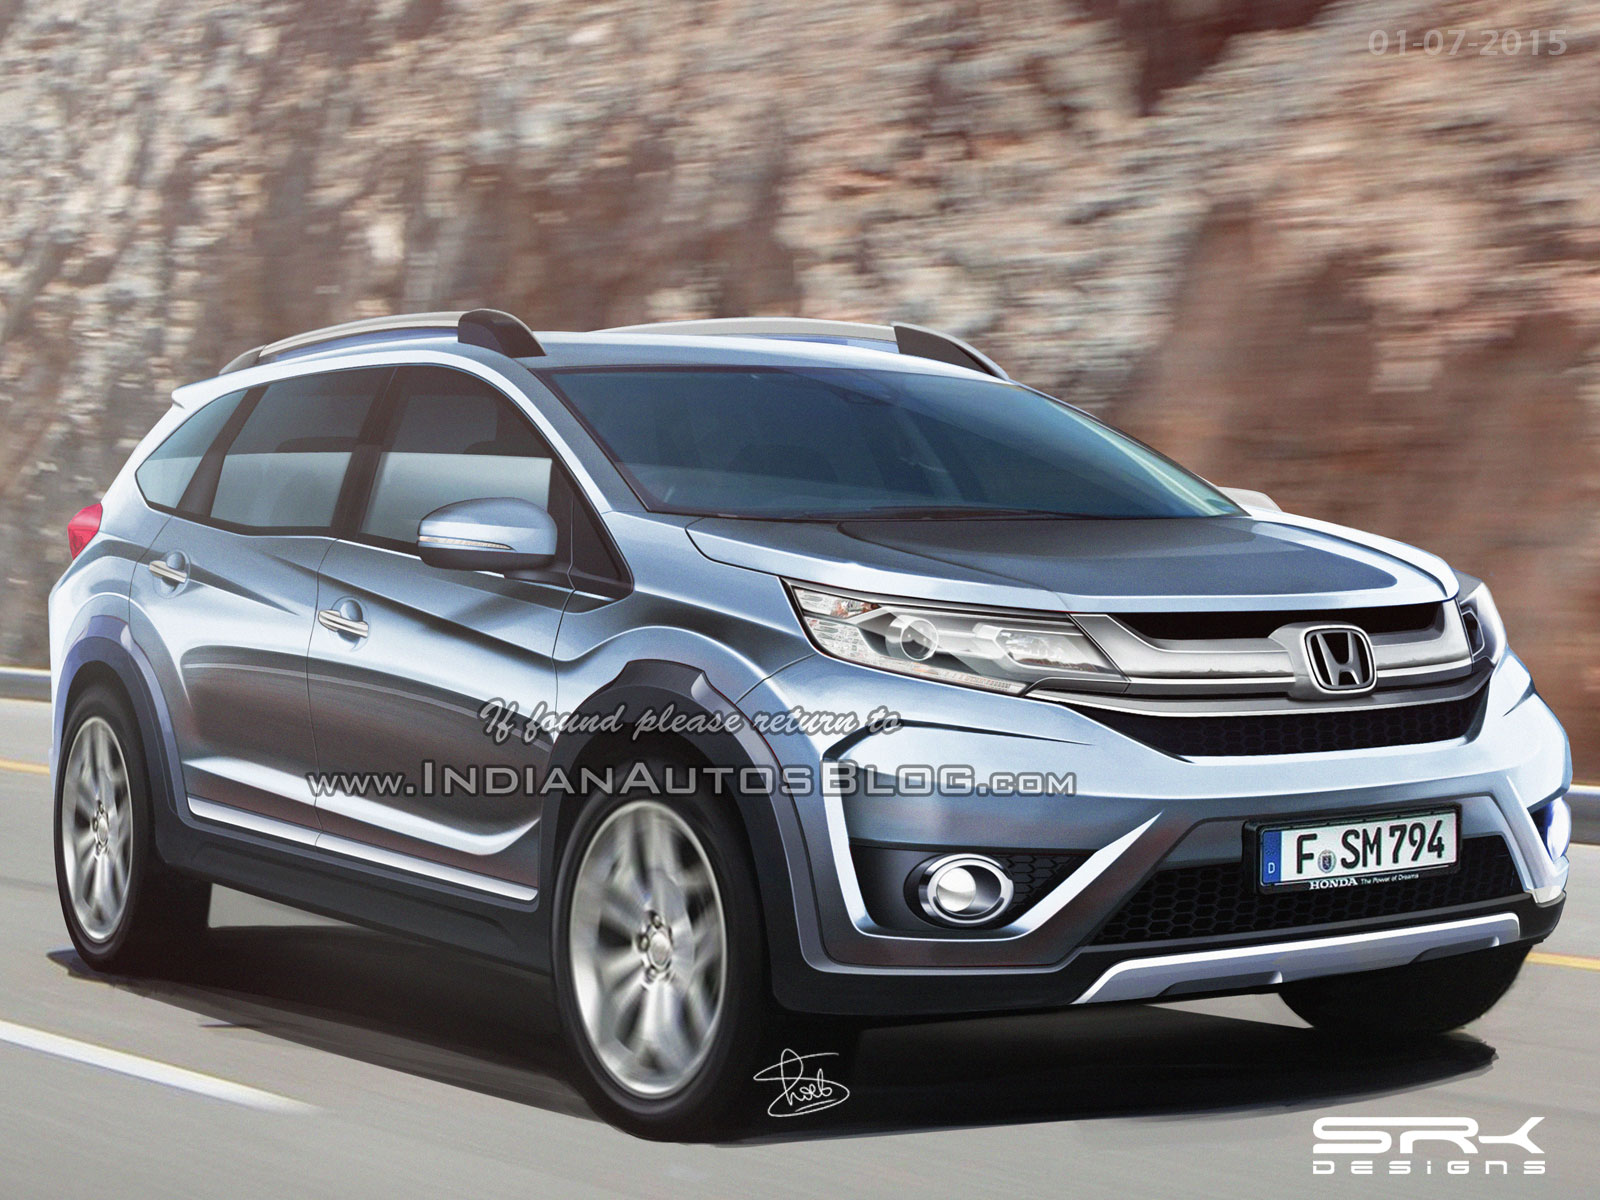 The All New Honda BR-V Renders And Speculated Price 